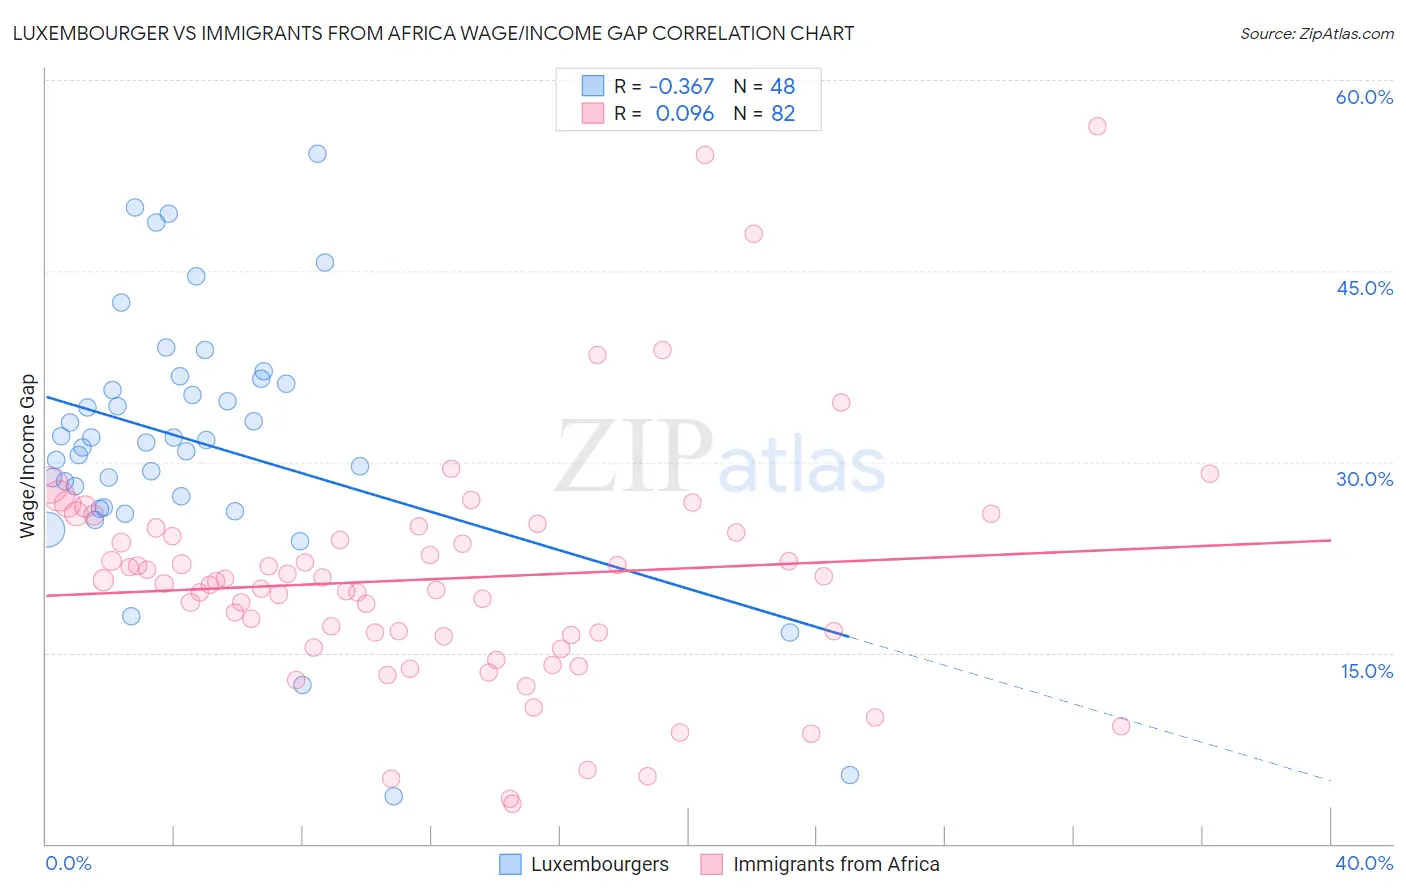 Luxembourger vs Immigrants from Africa Wage/Income Gap